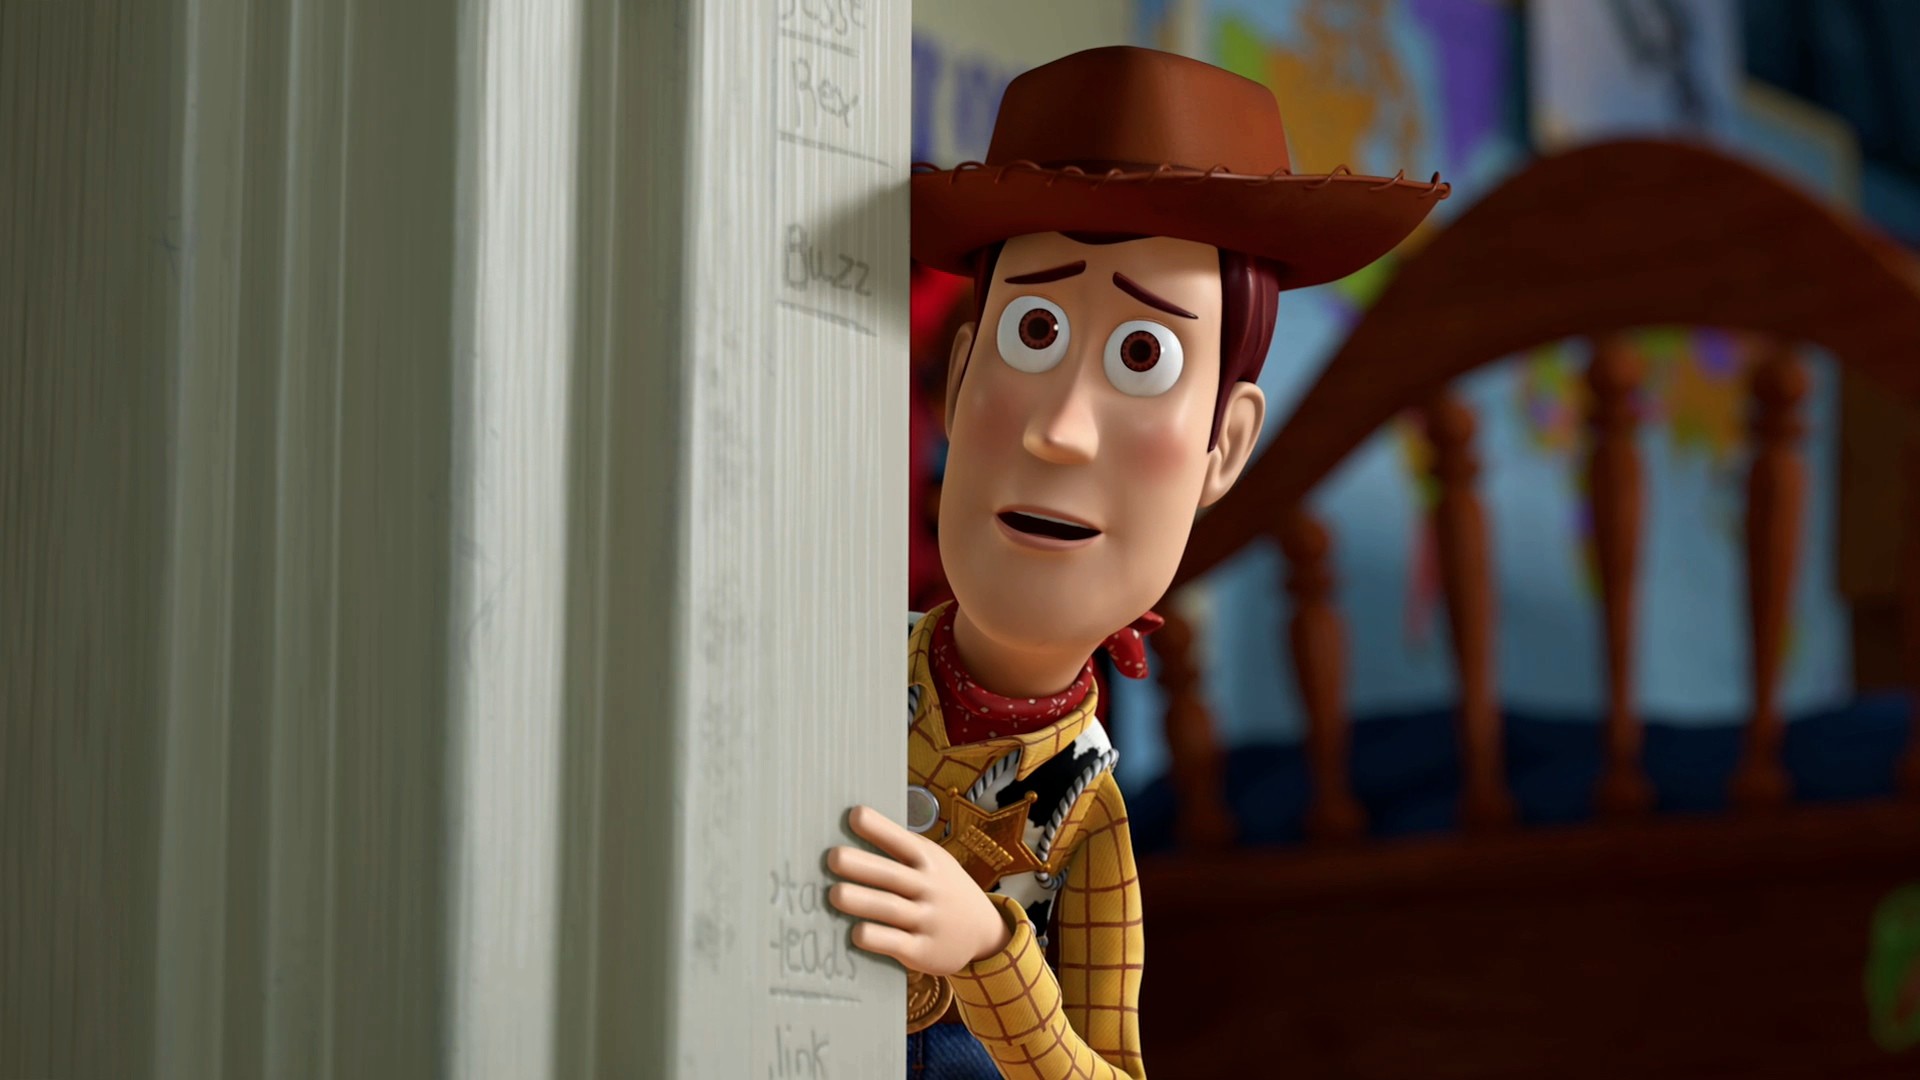 1920x1080  Toy Story Woody. How to set wallpaper on your desktop? Click the  download link from above and set the wallpaper on the desktop from your OS.